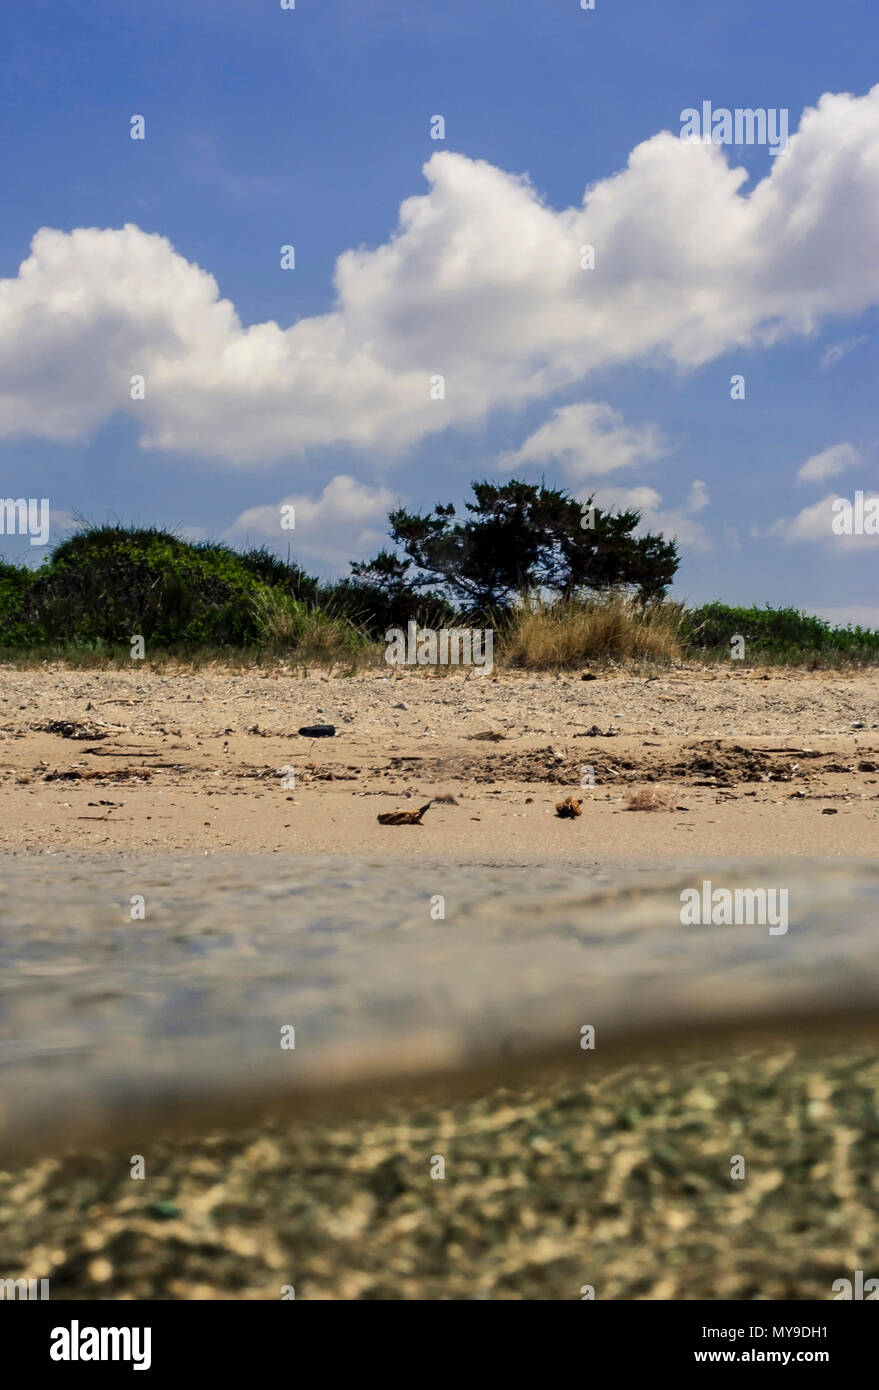 Split level over-under underwater sea image of foliage in Greek beach with golden sand on bright sunny day, Stock Photo